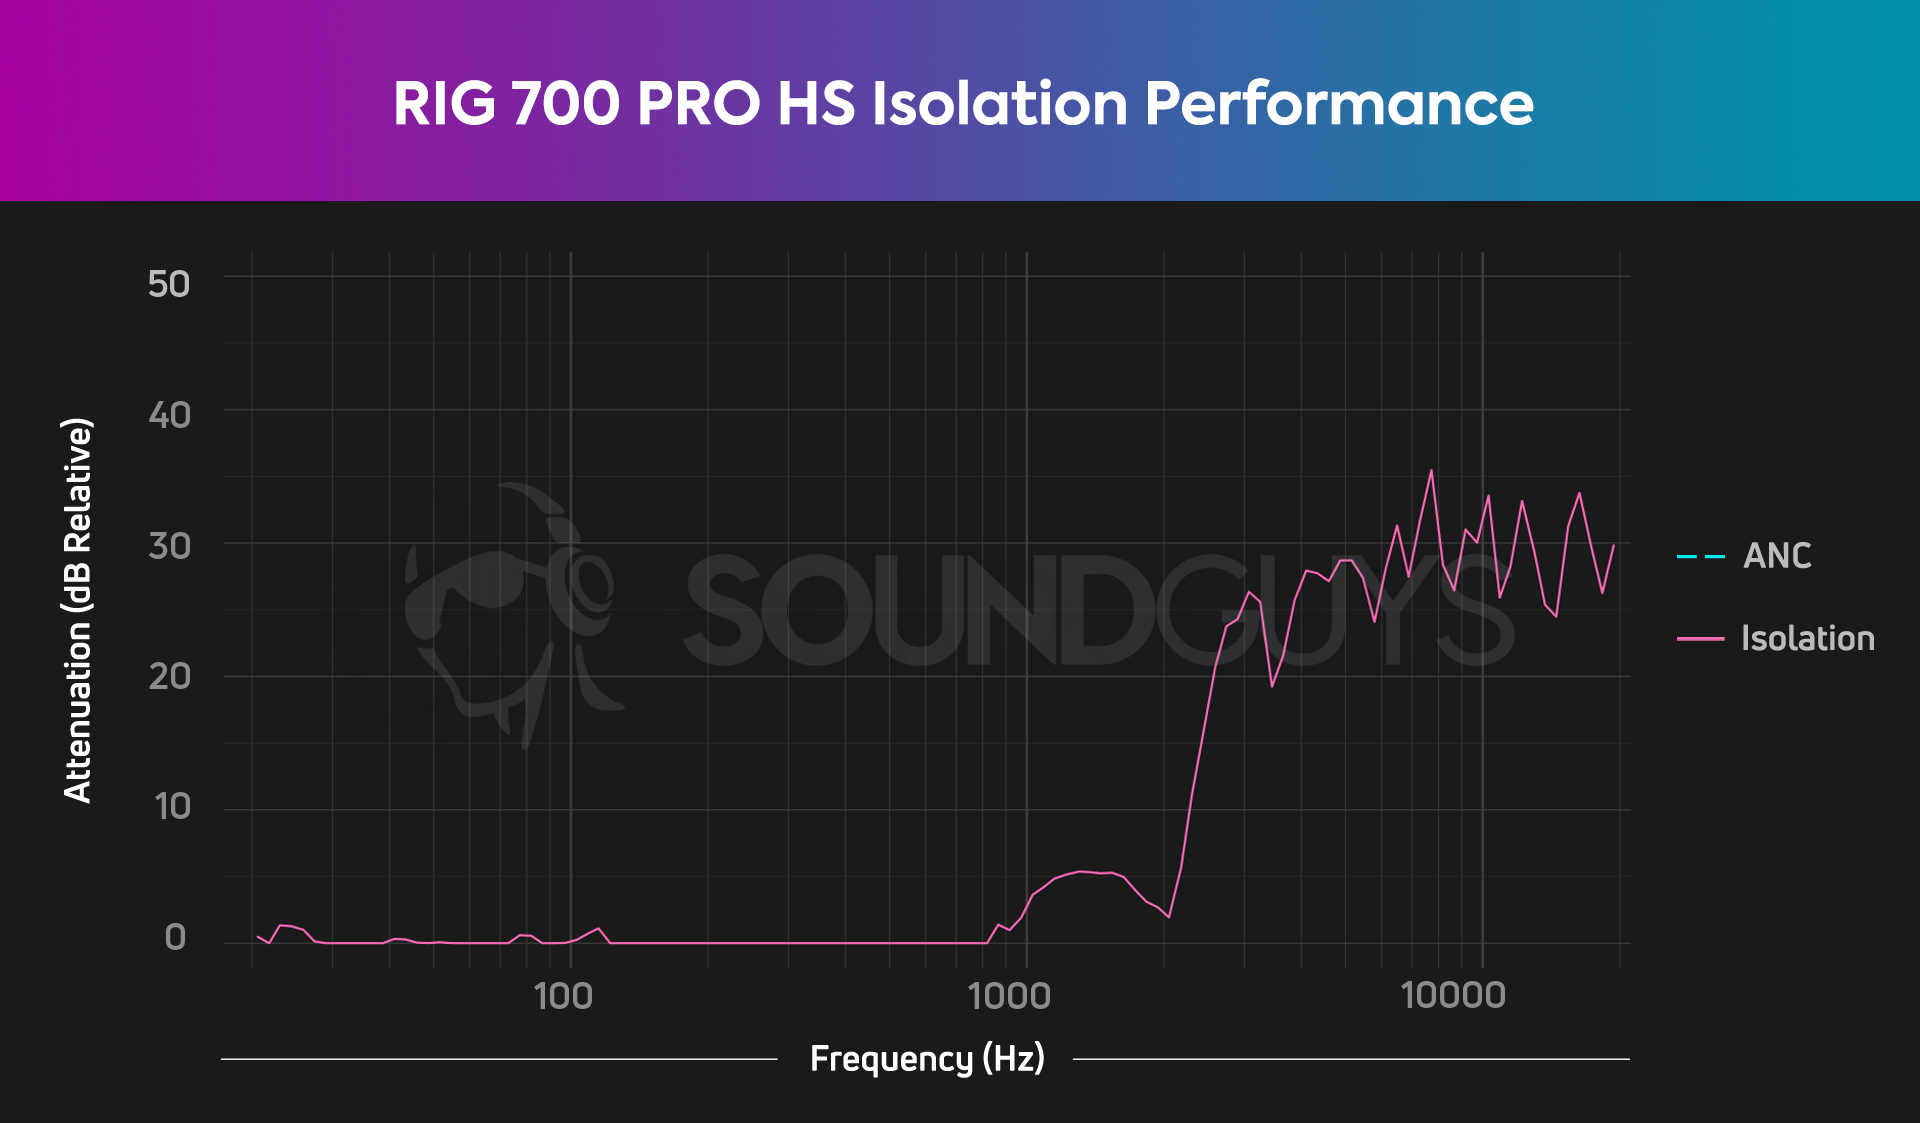 The attenuation chart for the RIG 700 PRO HS.